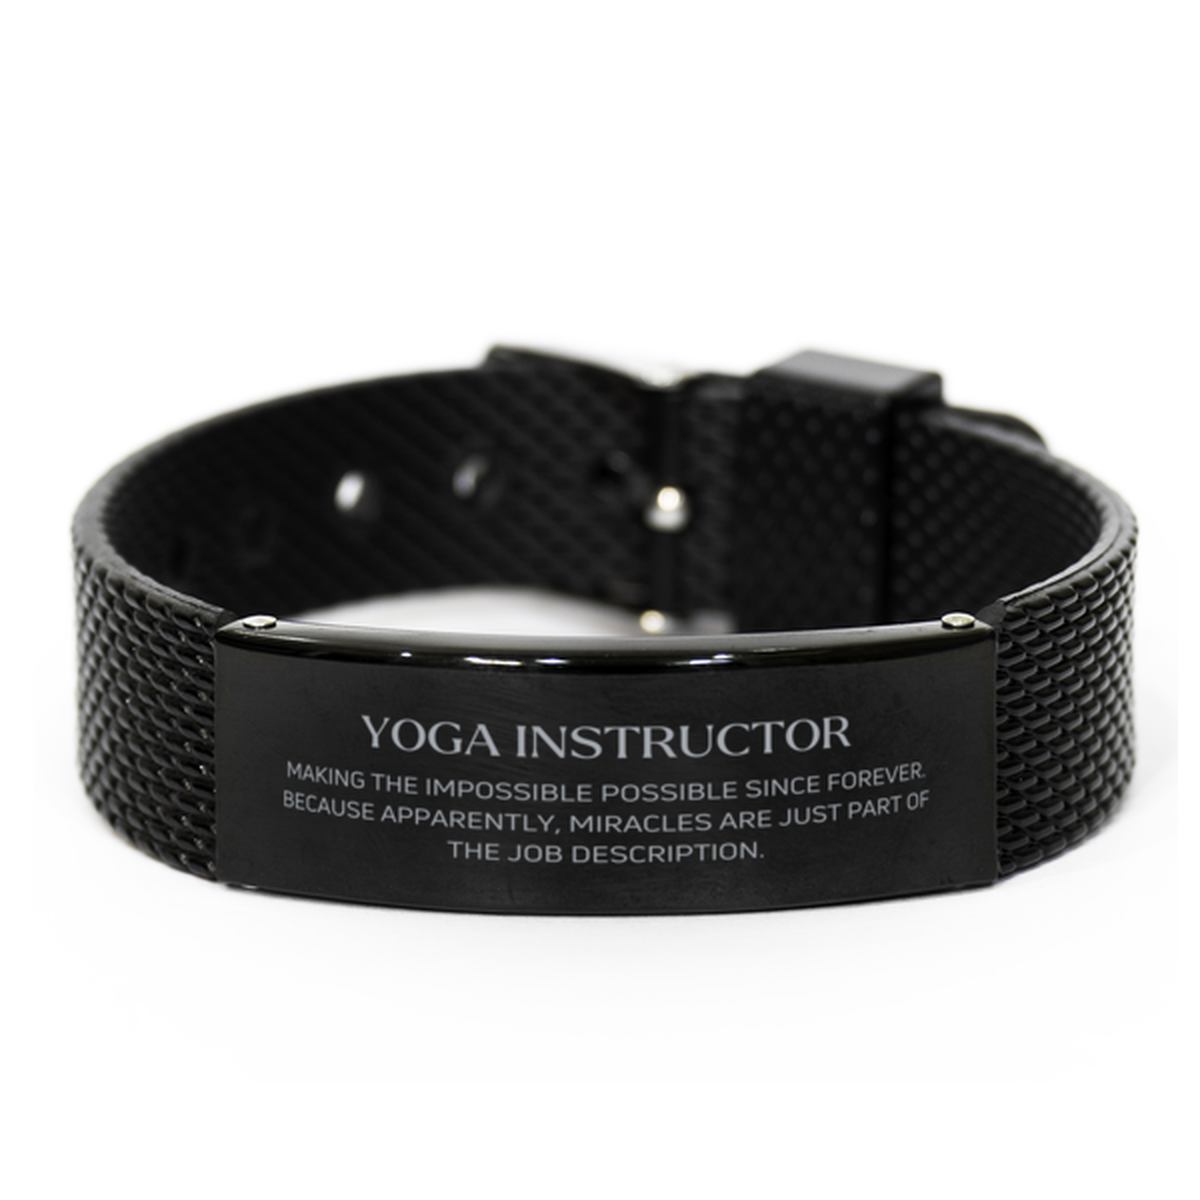 Funny Yoga Instructor Gifts, Miracles are just part of the job description, Inspirational Birthday Black Shark Mesh Bracelet For Yoga Instructor, Men, Women, Coworkers, Friends, Boss